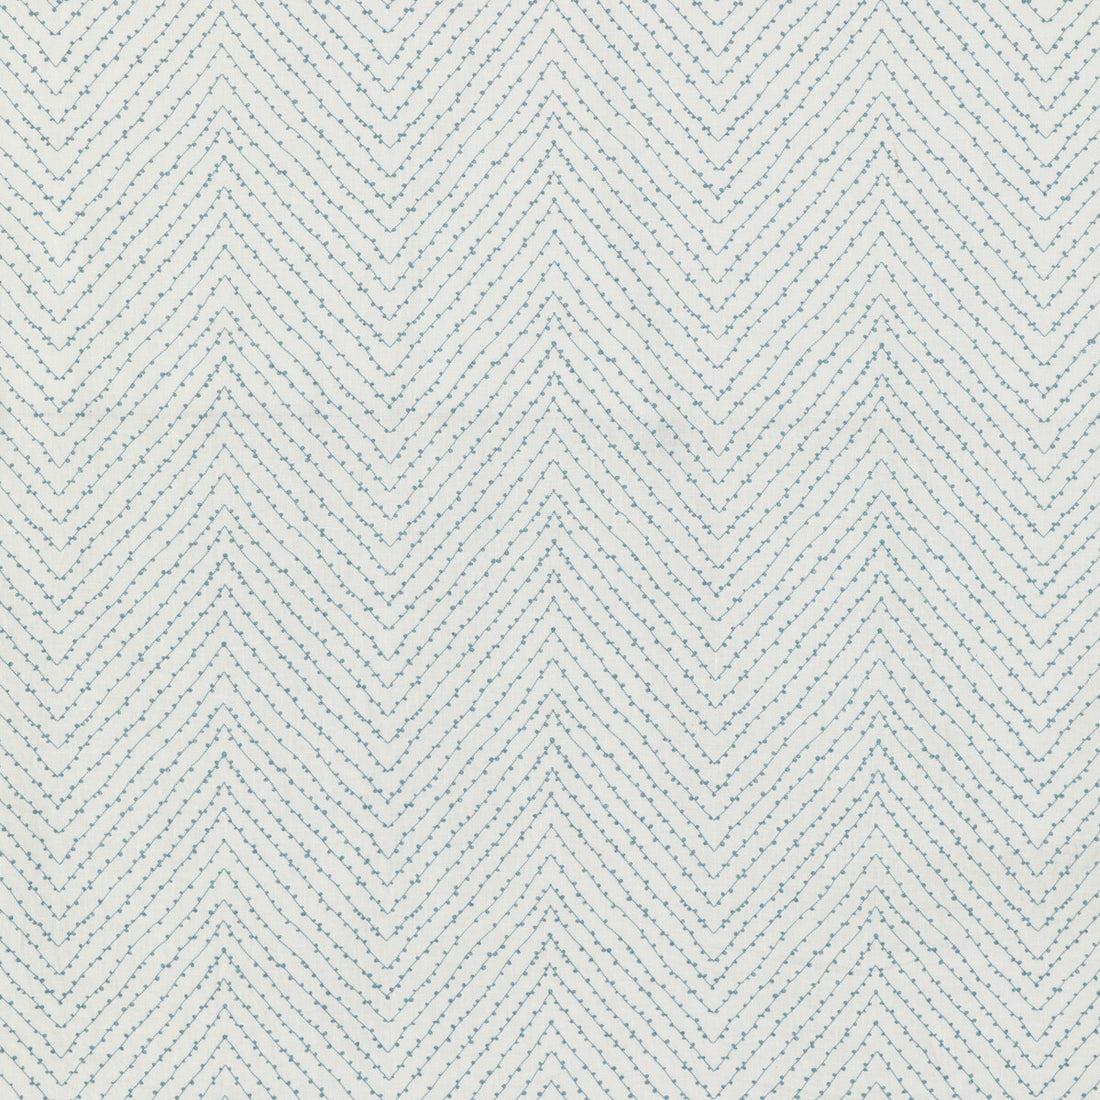 Stringknot fabric in horizon color - pattern 4851.15.0 - by Kravet Basics in the Monterey collection